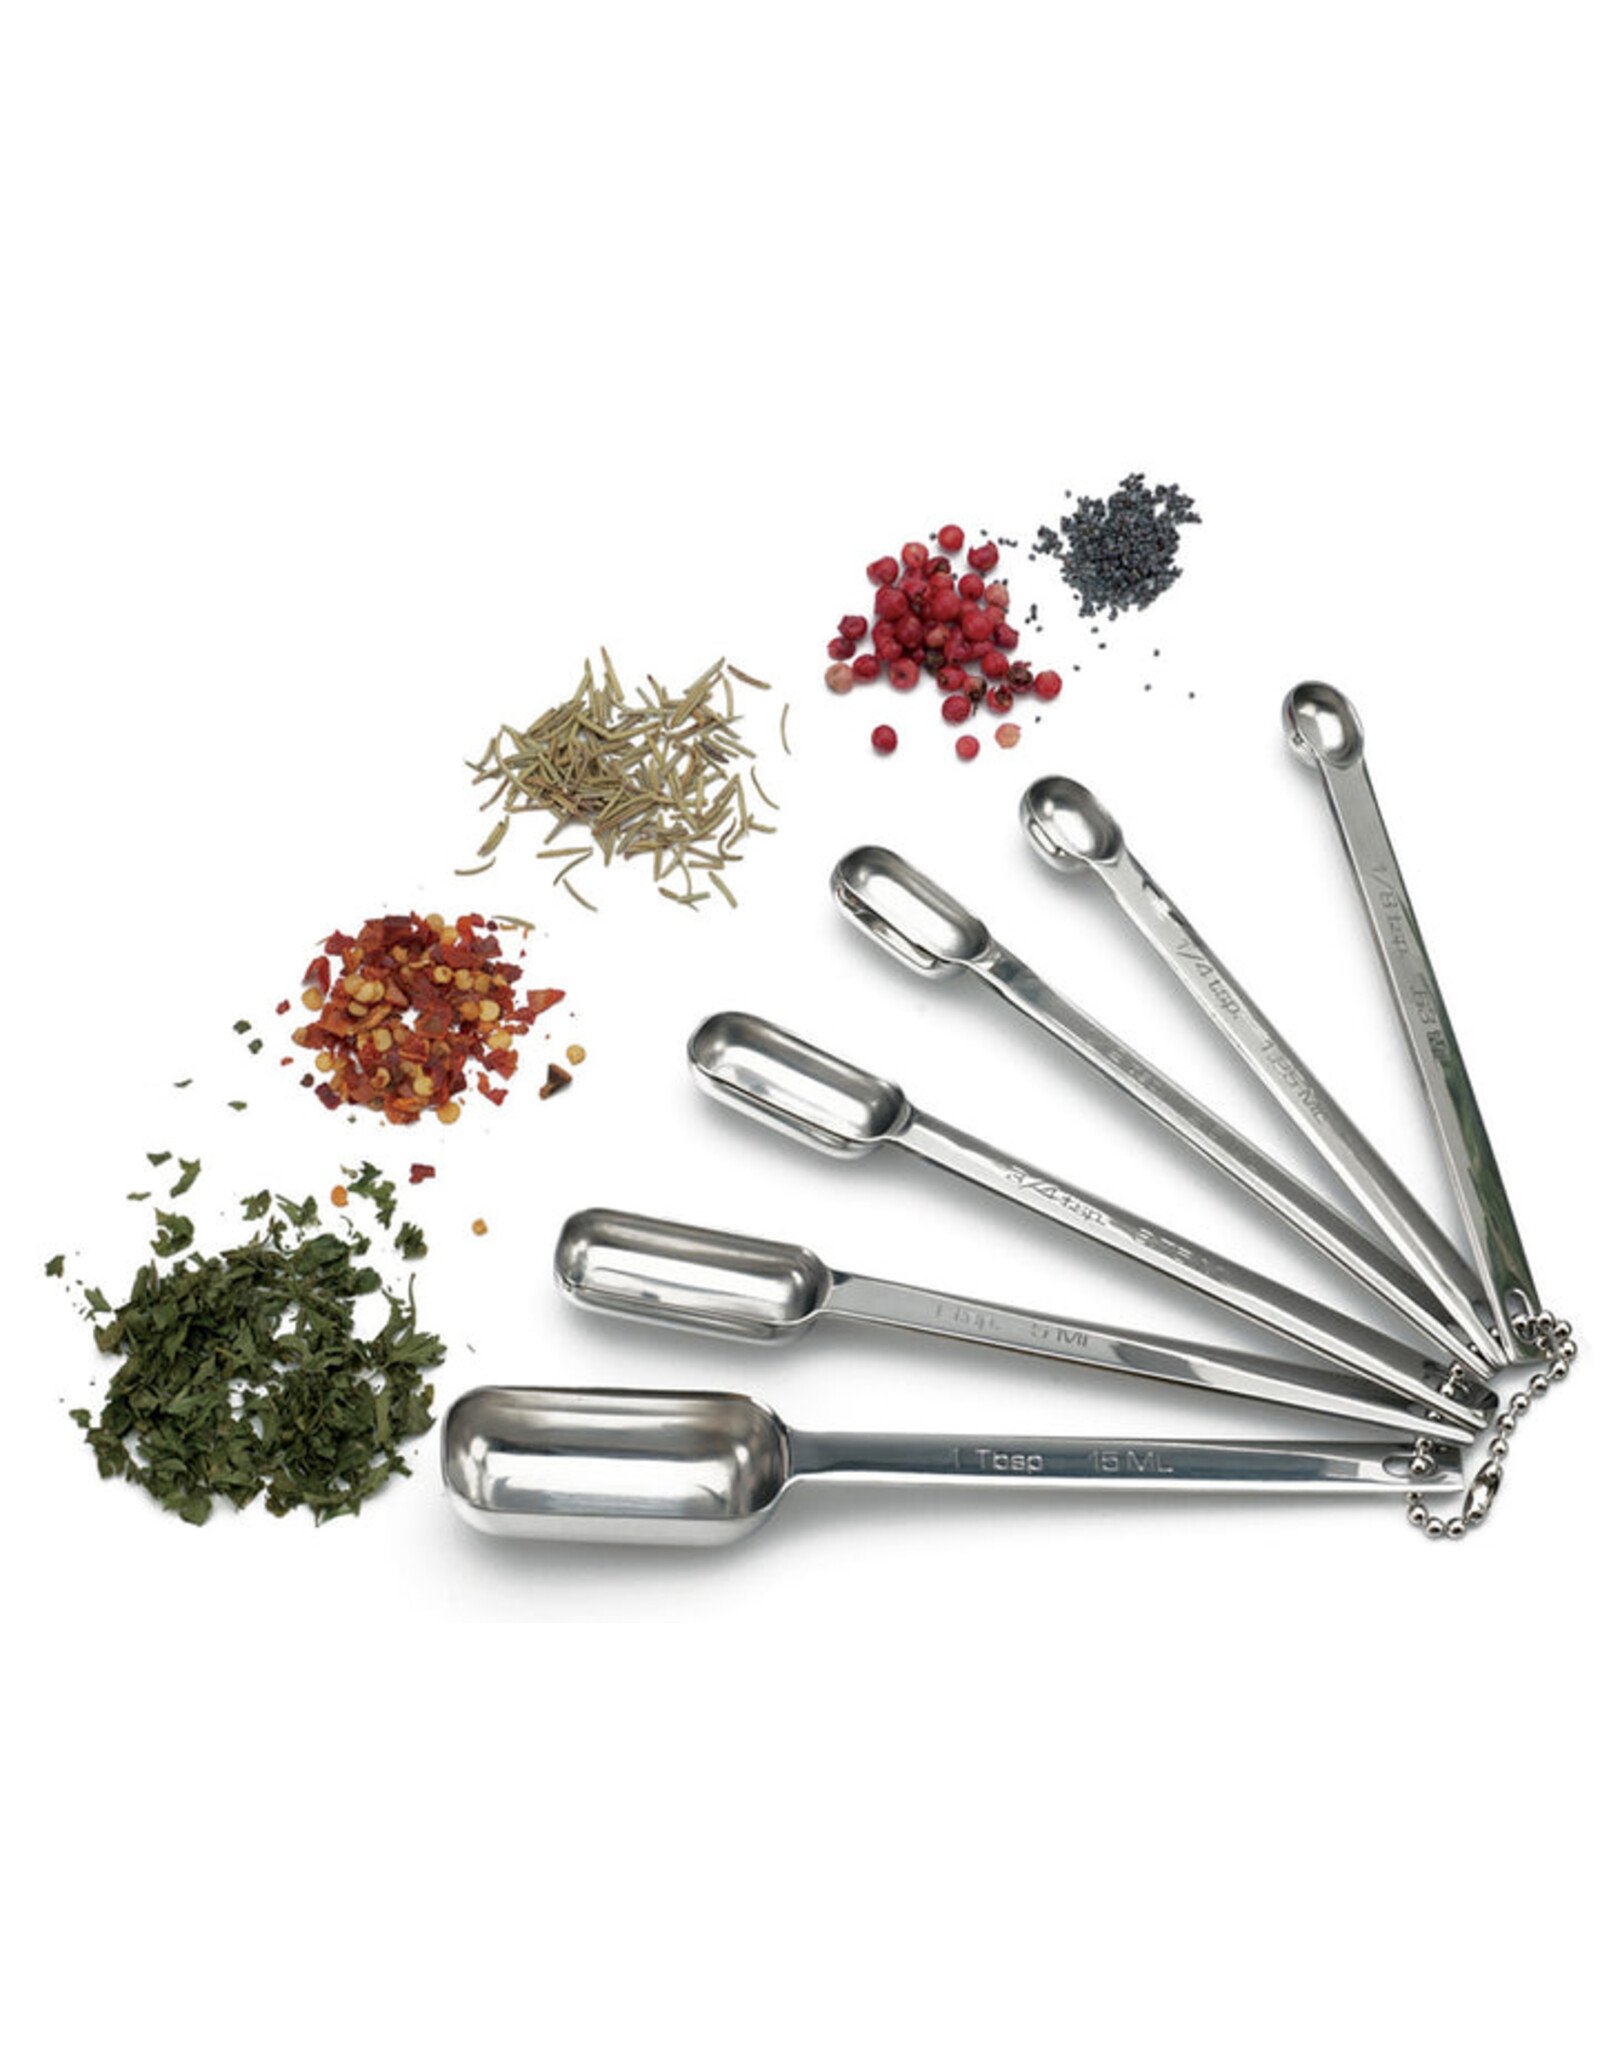 Spice Measuring Spoon Set of 6